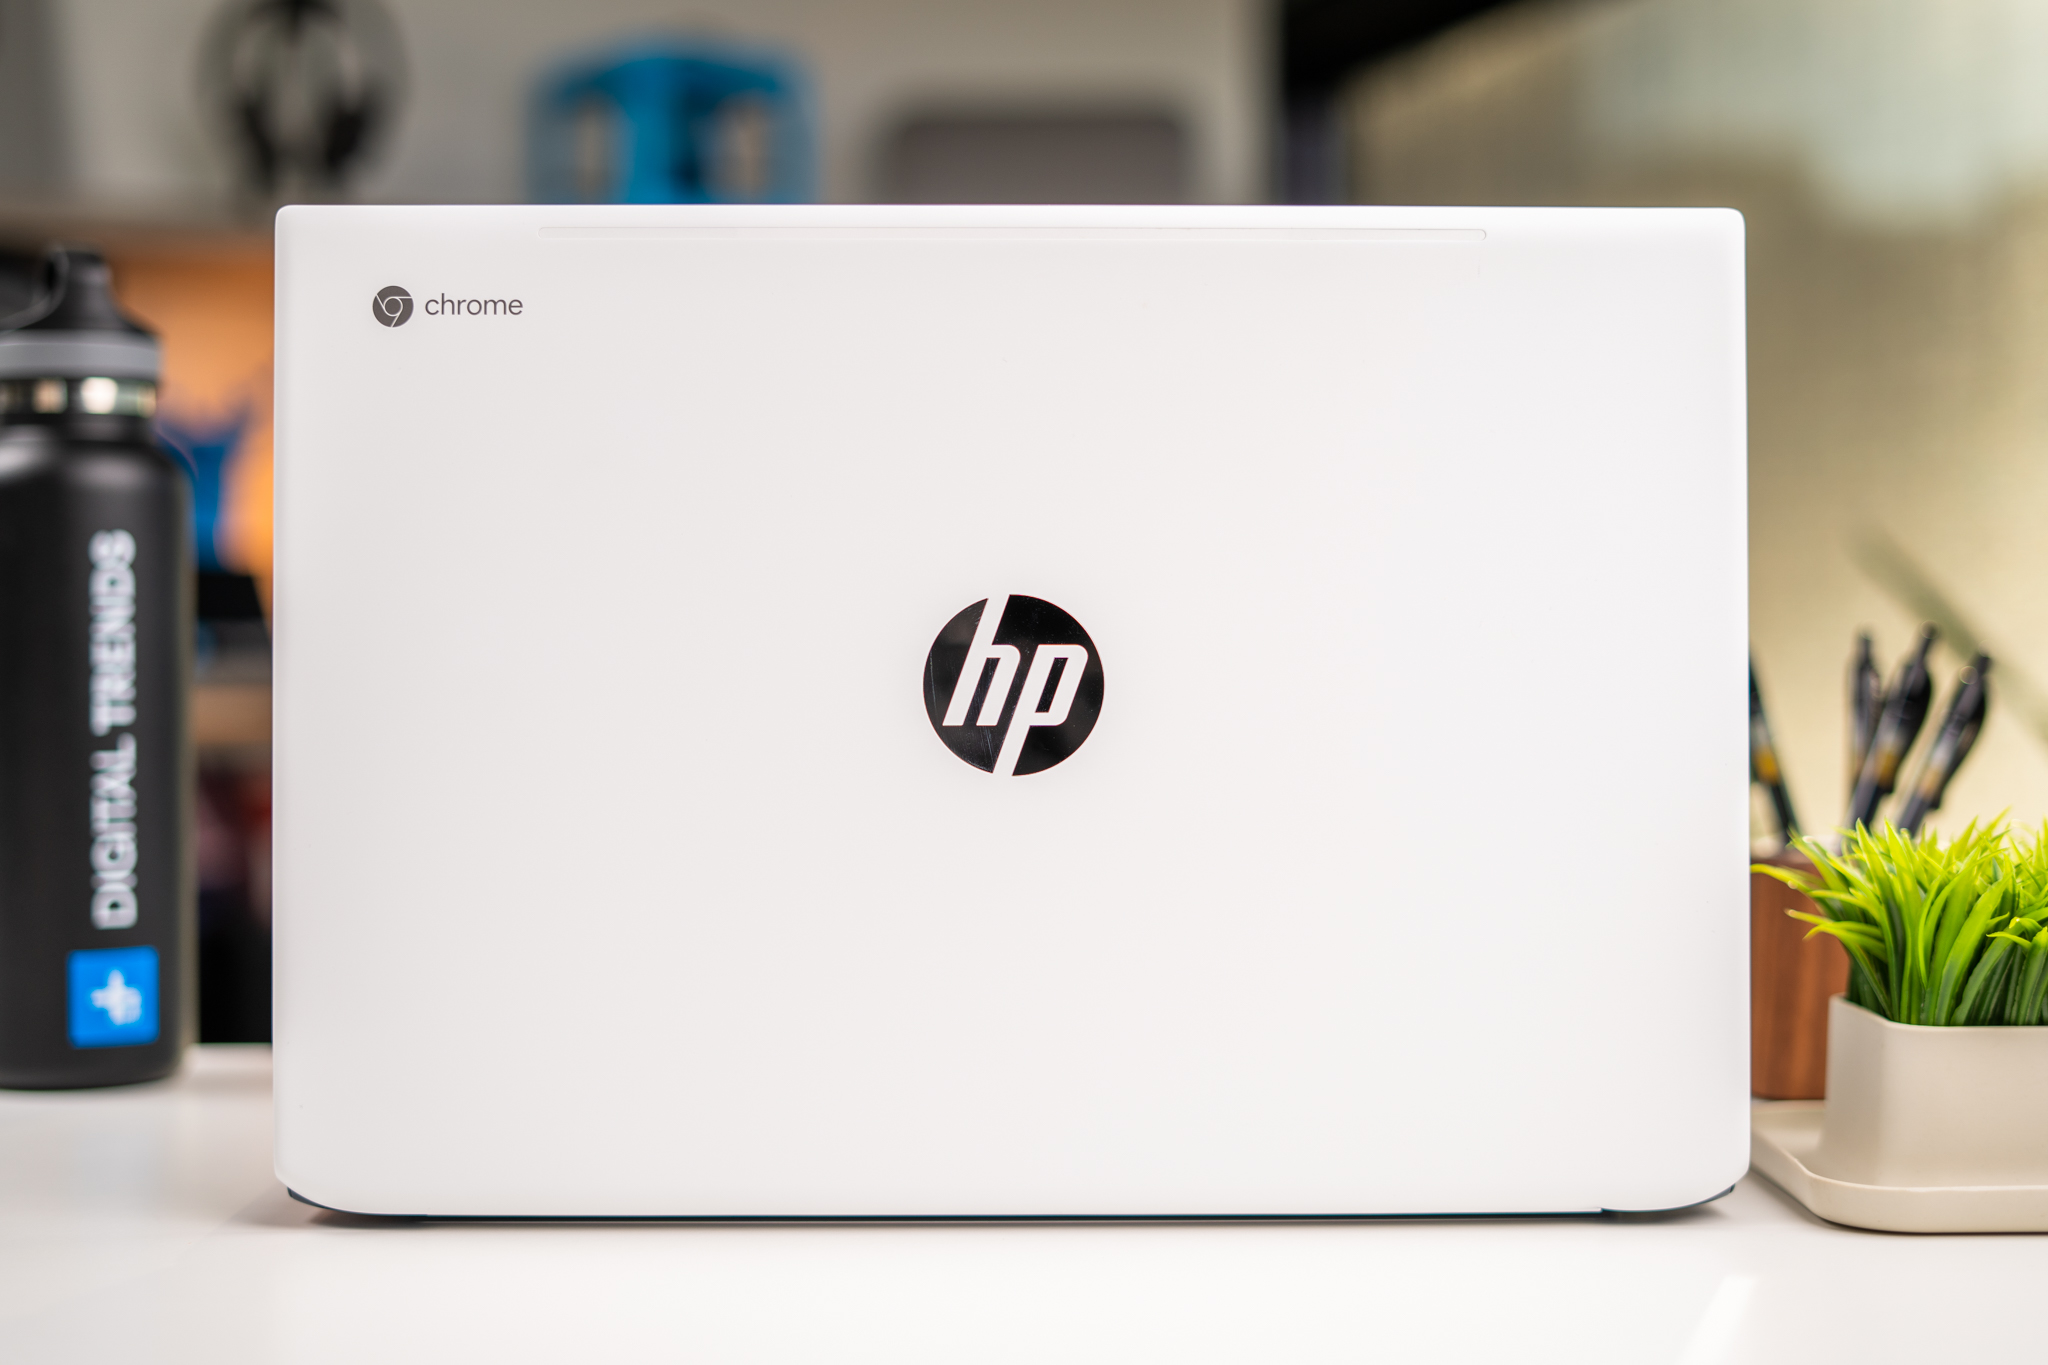 HP Chromebook 15 Review: The Bread and Butter Chromebook | Digital Trends